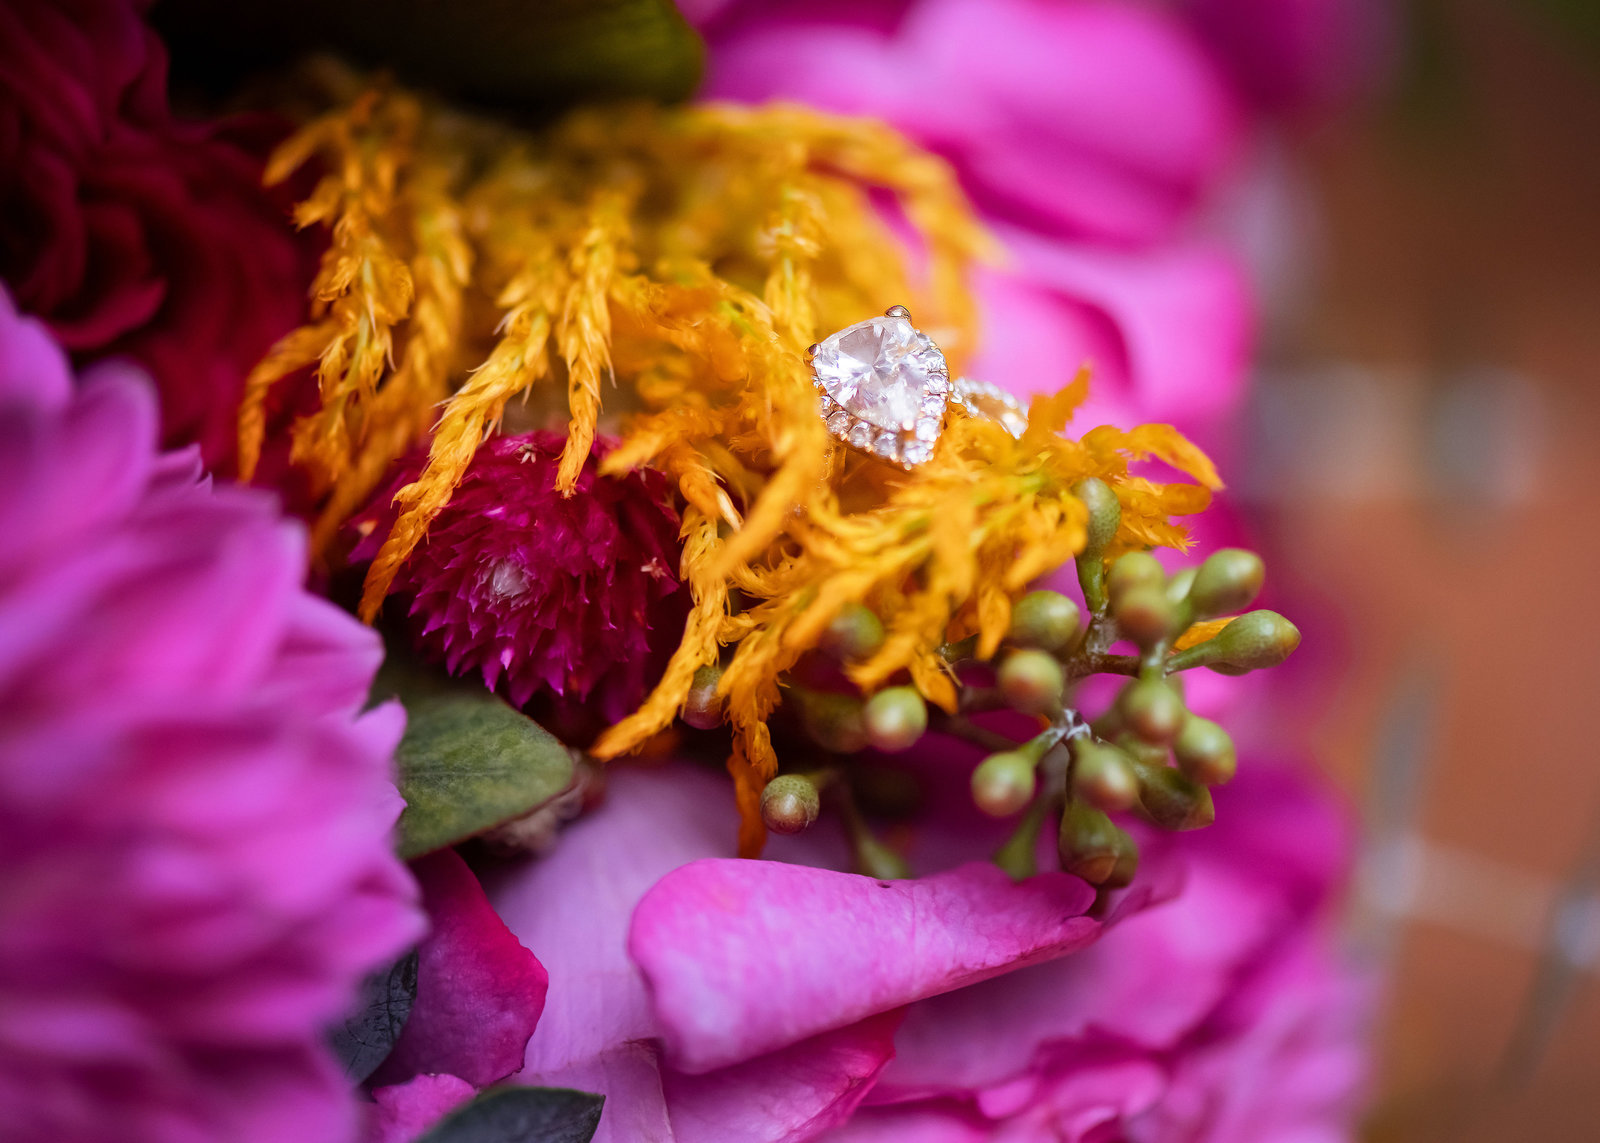 A one carat, luxury, oval cut diamond laying in the yellow and pink bridal bouquet.